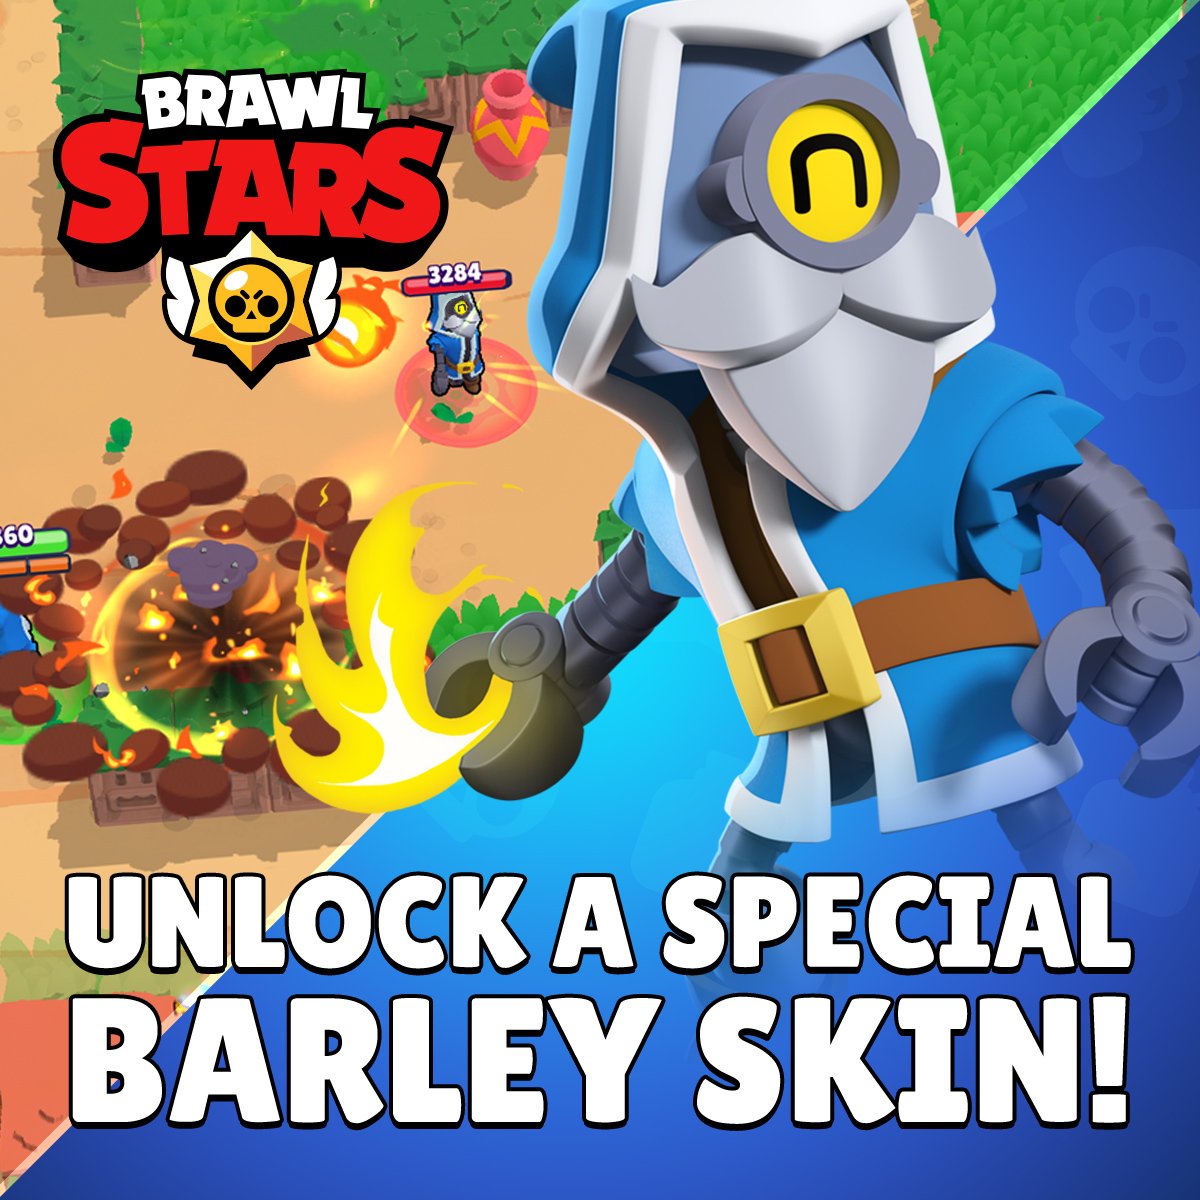 Brawl Stars On Twitter Connect Supercell Id In Brawl Stars To Unlock Barley And An Exclusive Wizard Skin Https T Co Zitr8yiqlm - supercell id brawl stars ios